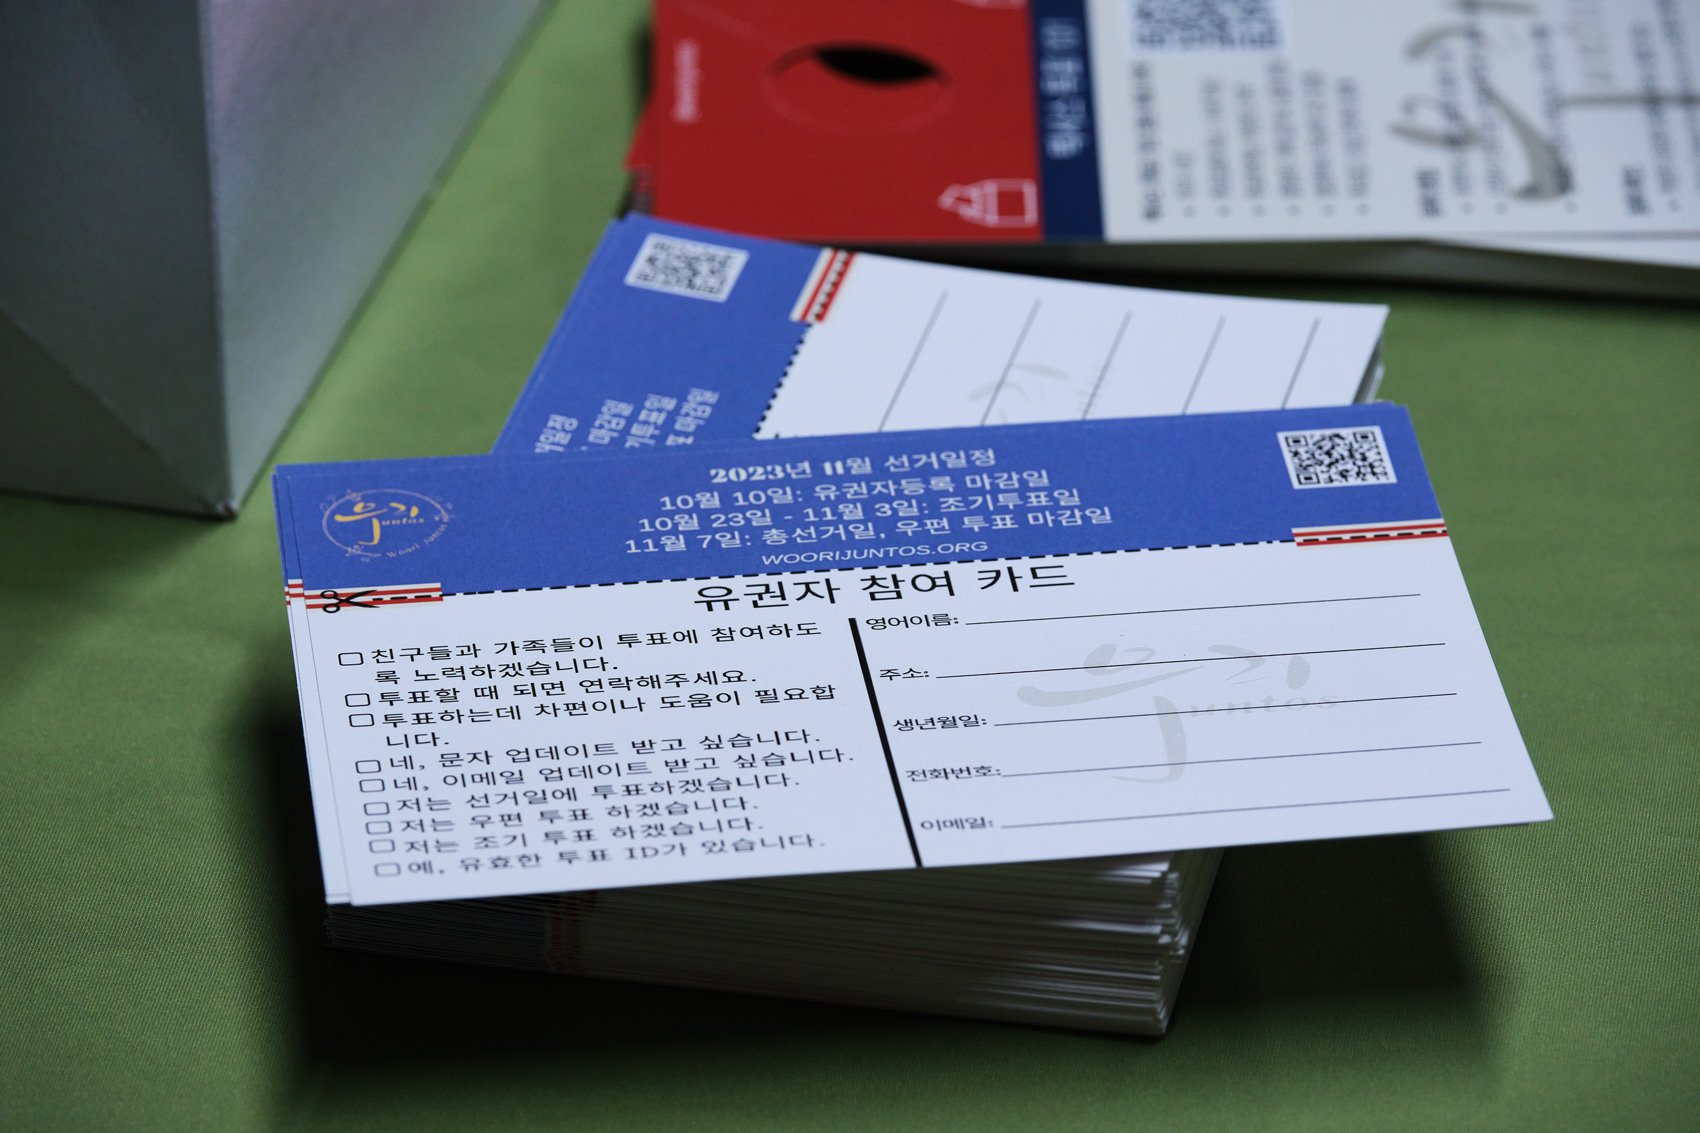 Voter’s pledge cards for those attending a forum at the Korean Community Center for those who don’t speak English to help them understand the new rules and restrictions of Texas SB 1 ahead of the Houston mayoral election